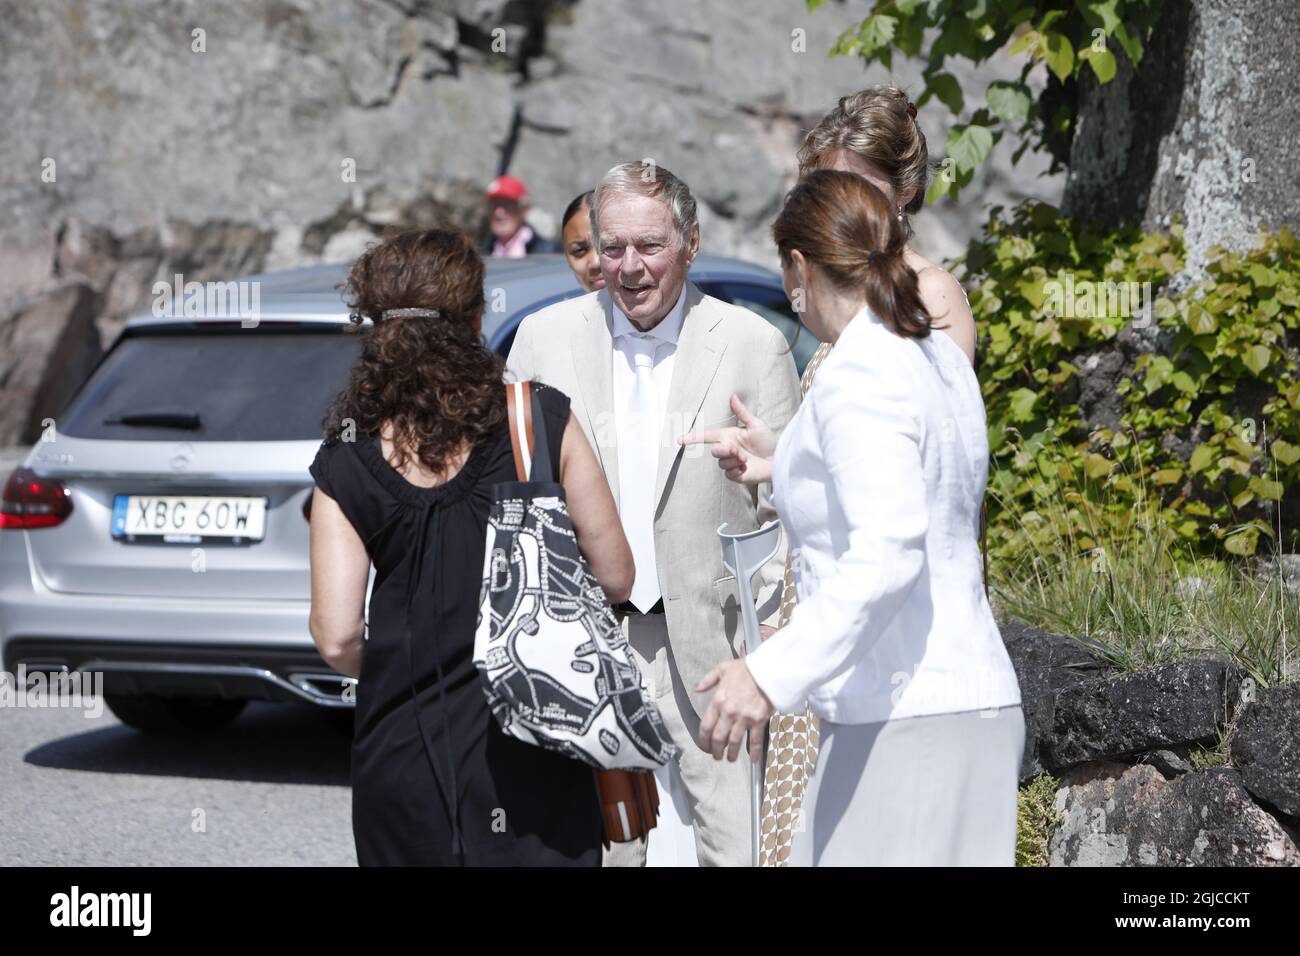 Peder Wallenberg, former husband of Anki Wallenberg Funeral of Anki Wallenberg in Dalaro church, Stockholm, Sweden 19 July 2019 Anki Wallenberg died in a sailing accident on the lake Geneva. She resided in London and was a close friend to the Swedish Royal Family. (c) Patrik Osterberg / TT / kod 2857  Stock Photo